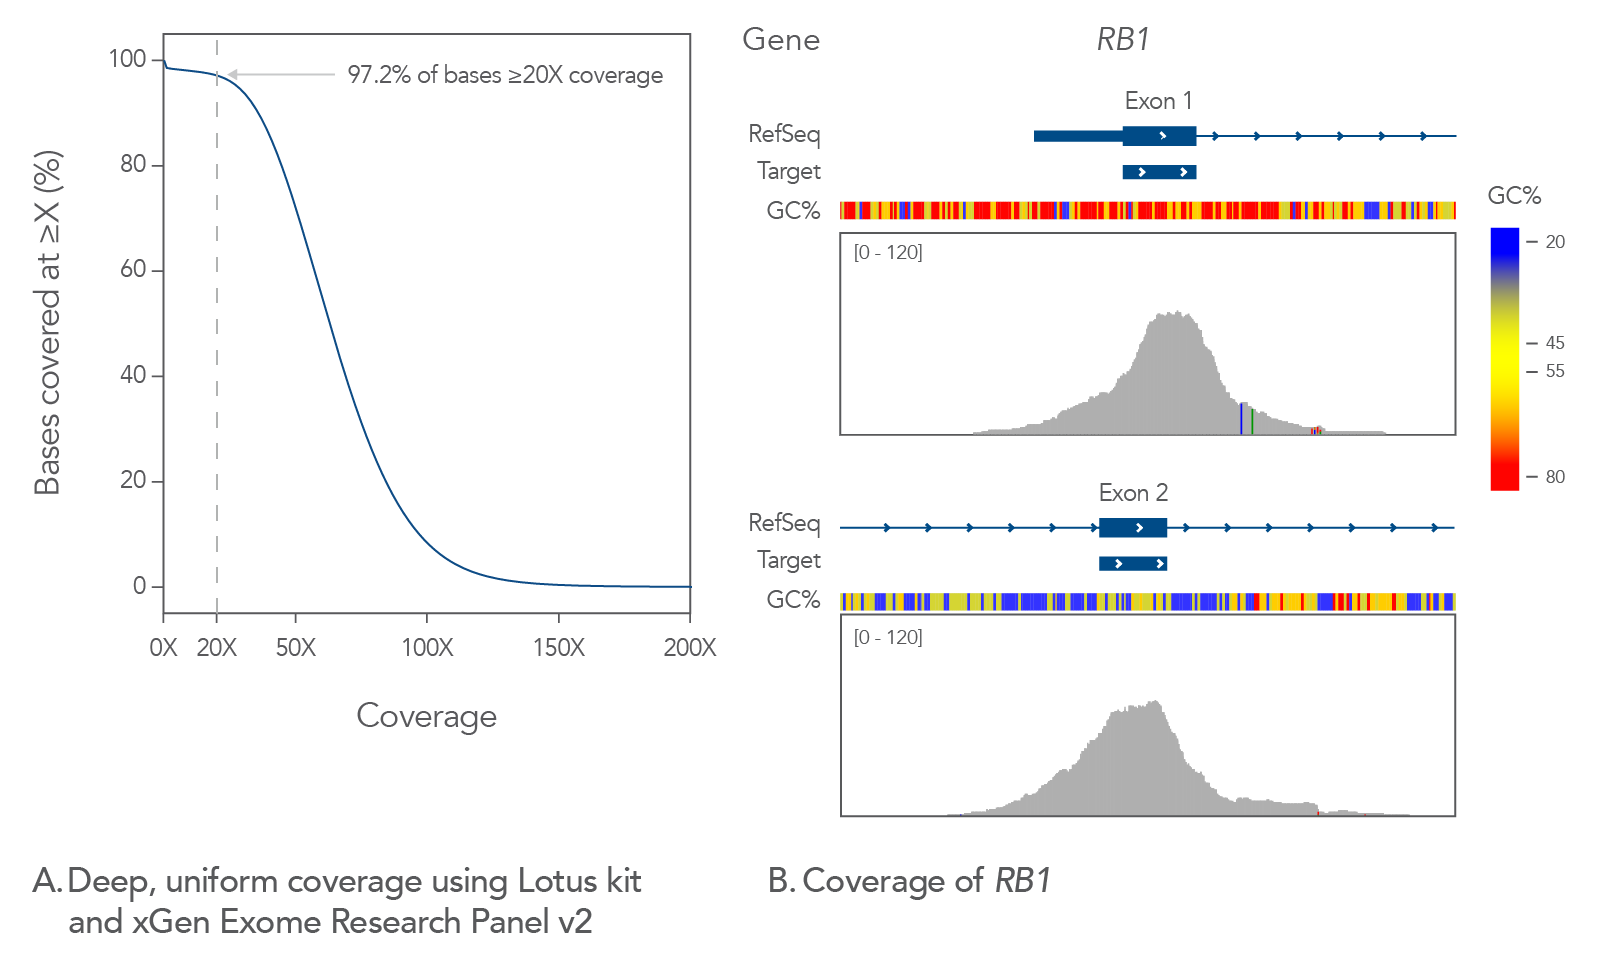 Uniform coverage with Lotus kit and xGen Exome Research Pane